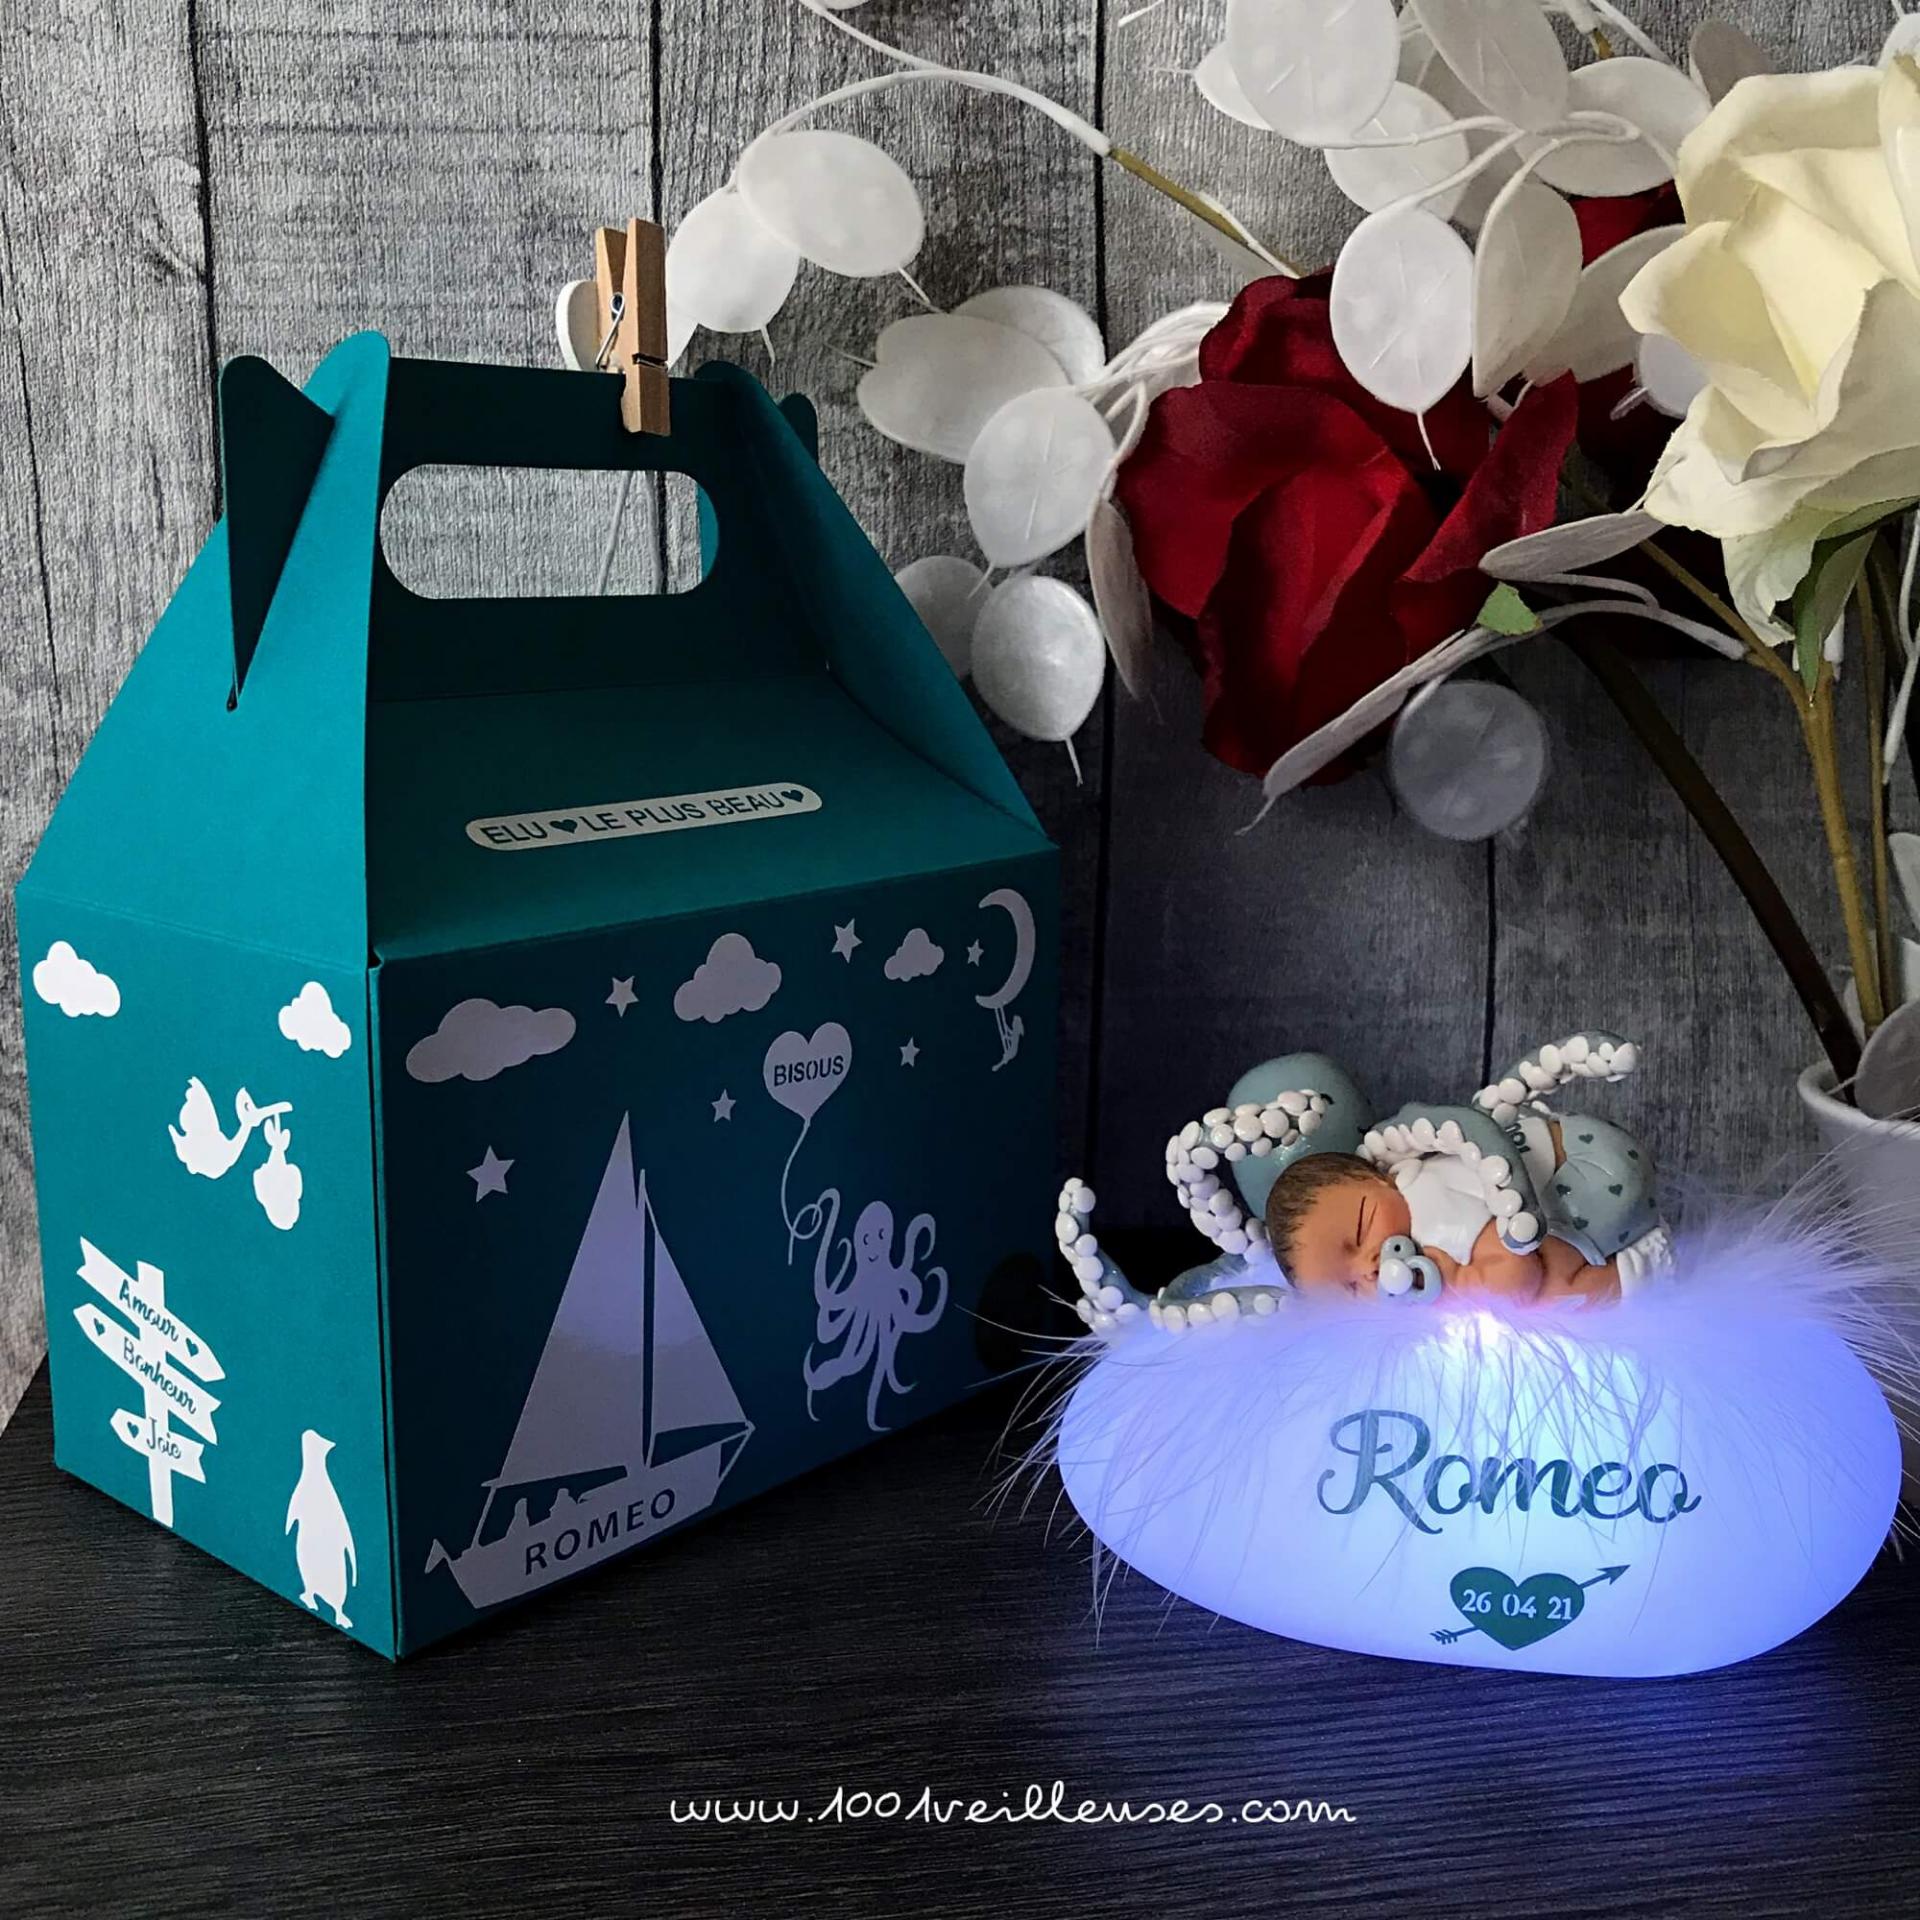 Personalized baby gift: doudou child lamp with octopus theme